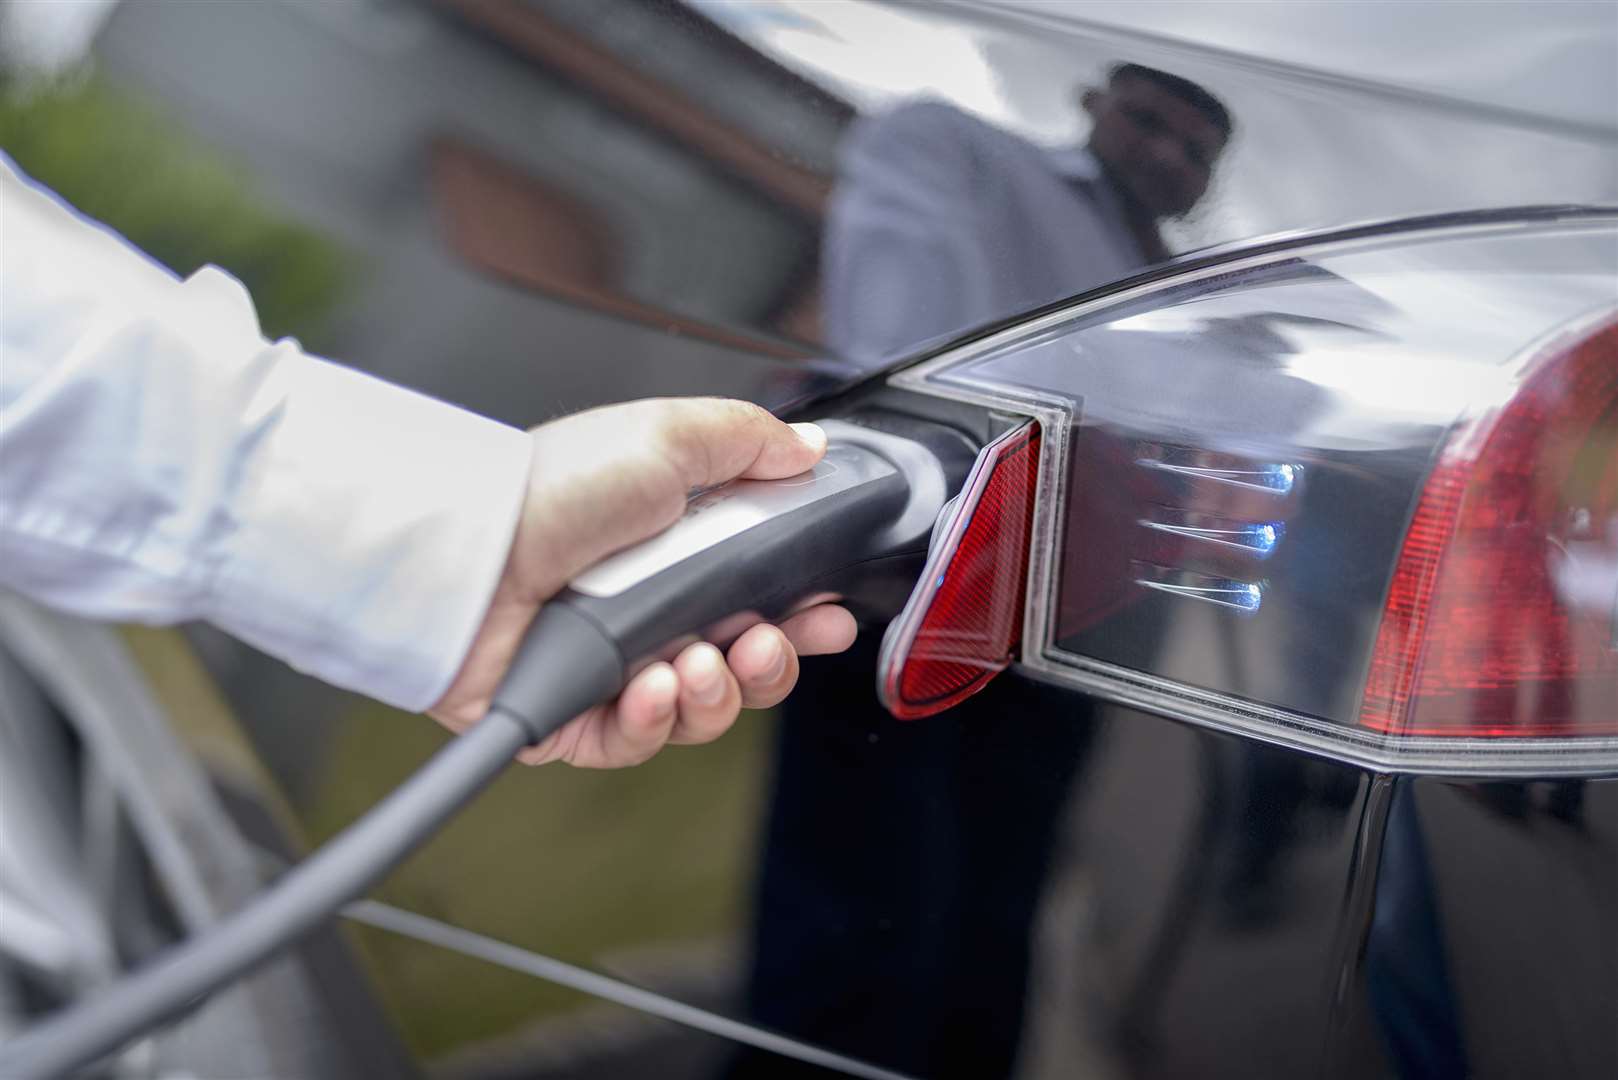 Project Celeritas with use AMTE Power's cell charging expertise to enable electric cars and other battery powered vehicles to have a 80 per cent charge in just 12 minutes.